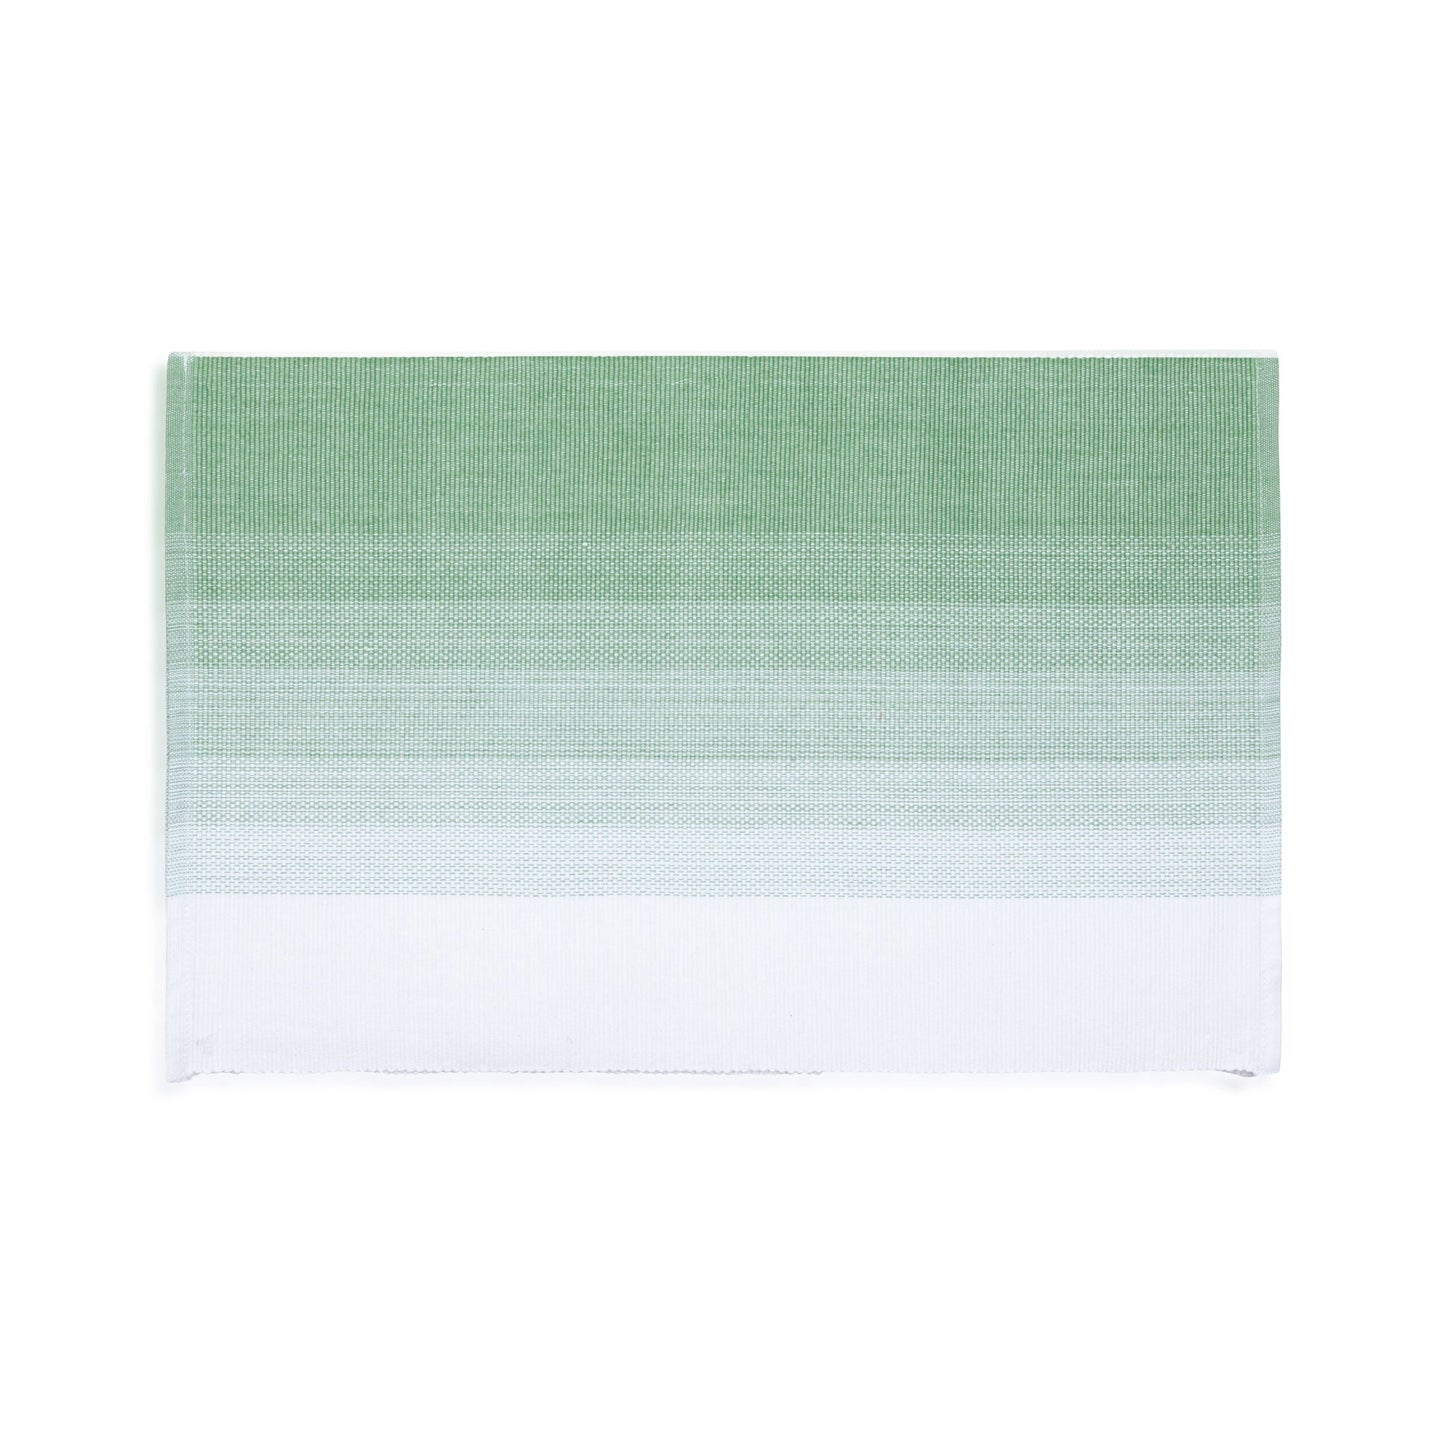 Green Ombre Woven Placemat